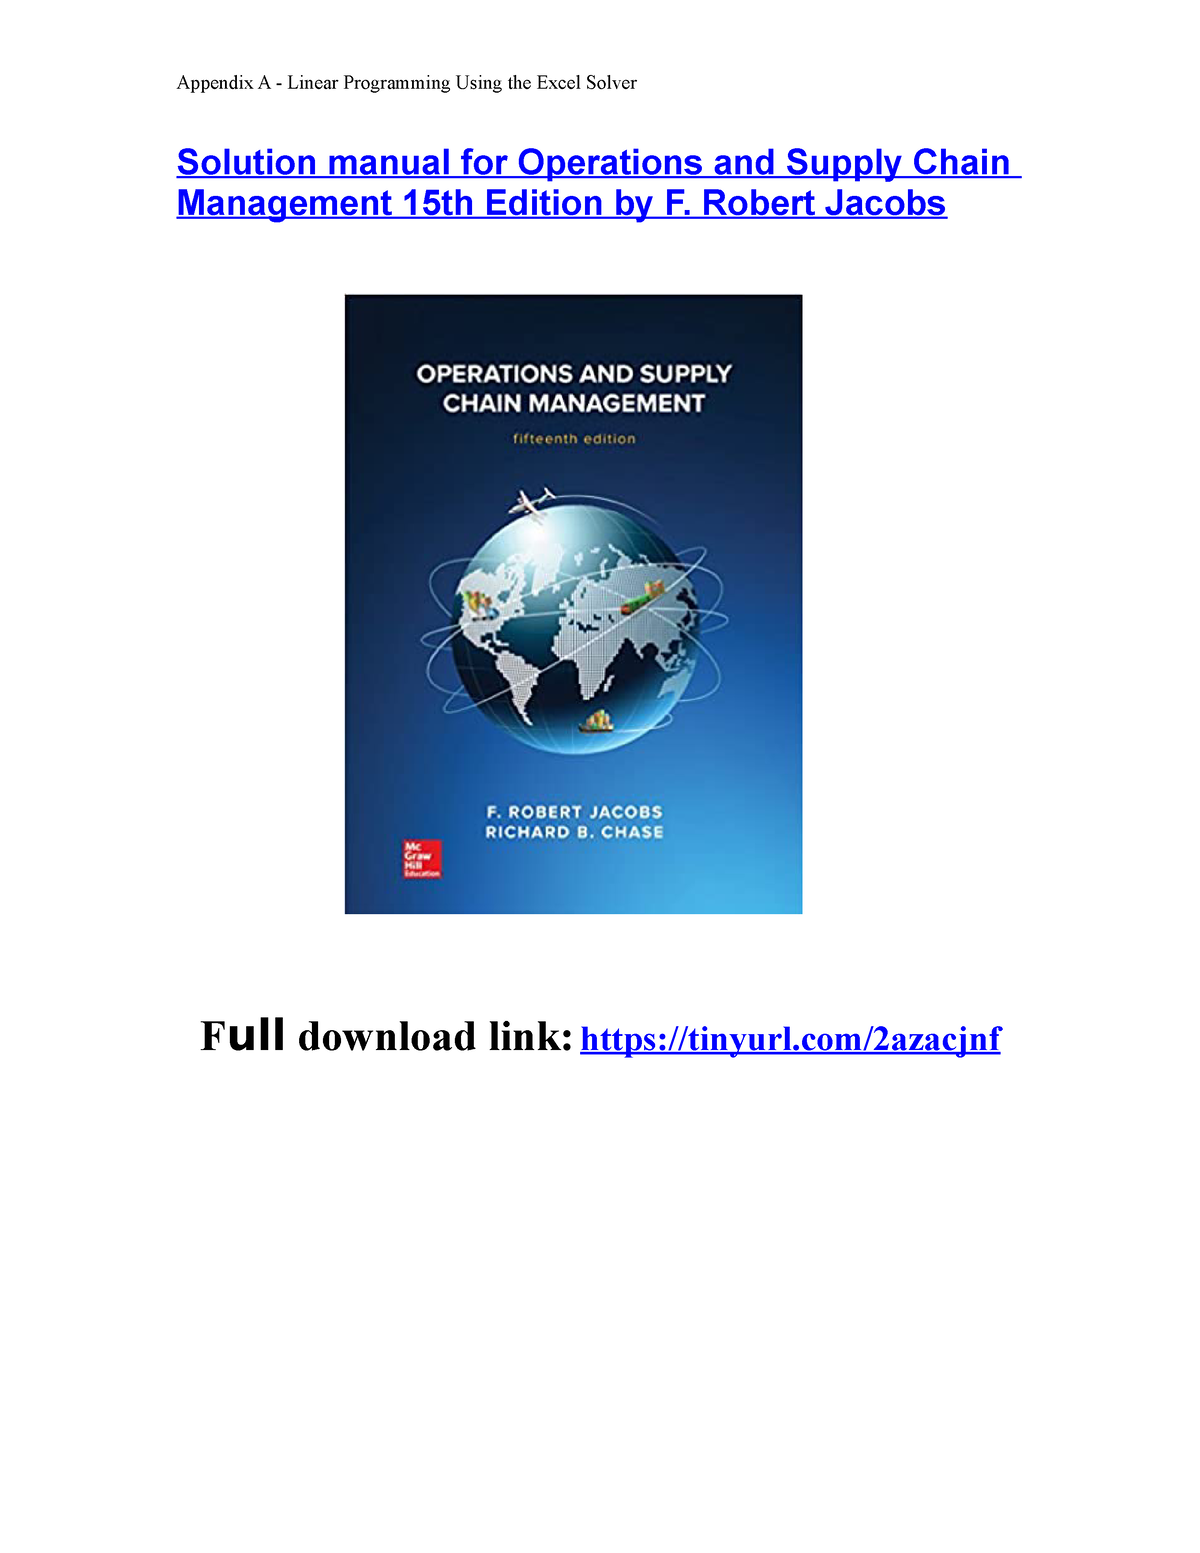 Solution Manual For Operations And Supply Chain Management 15th Edition